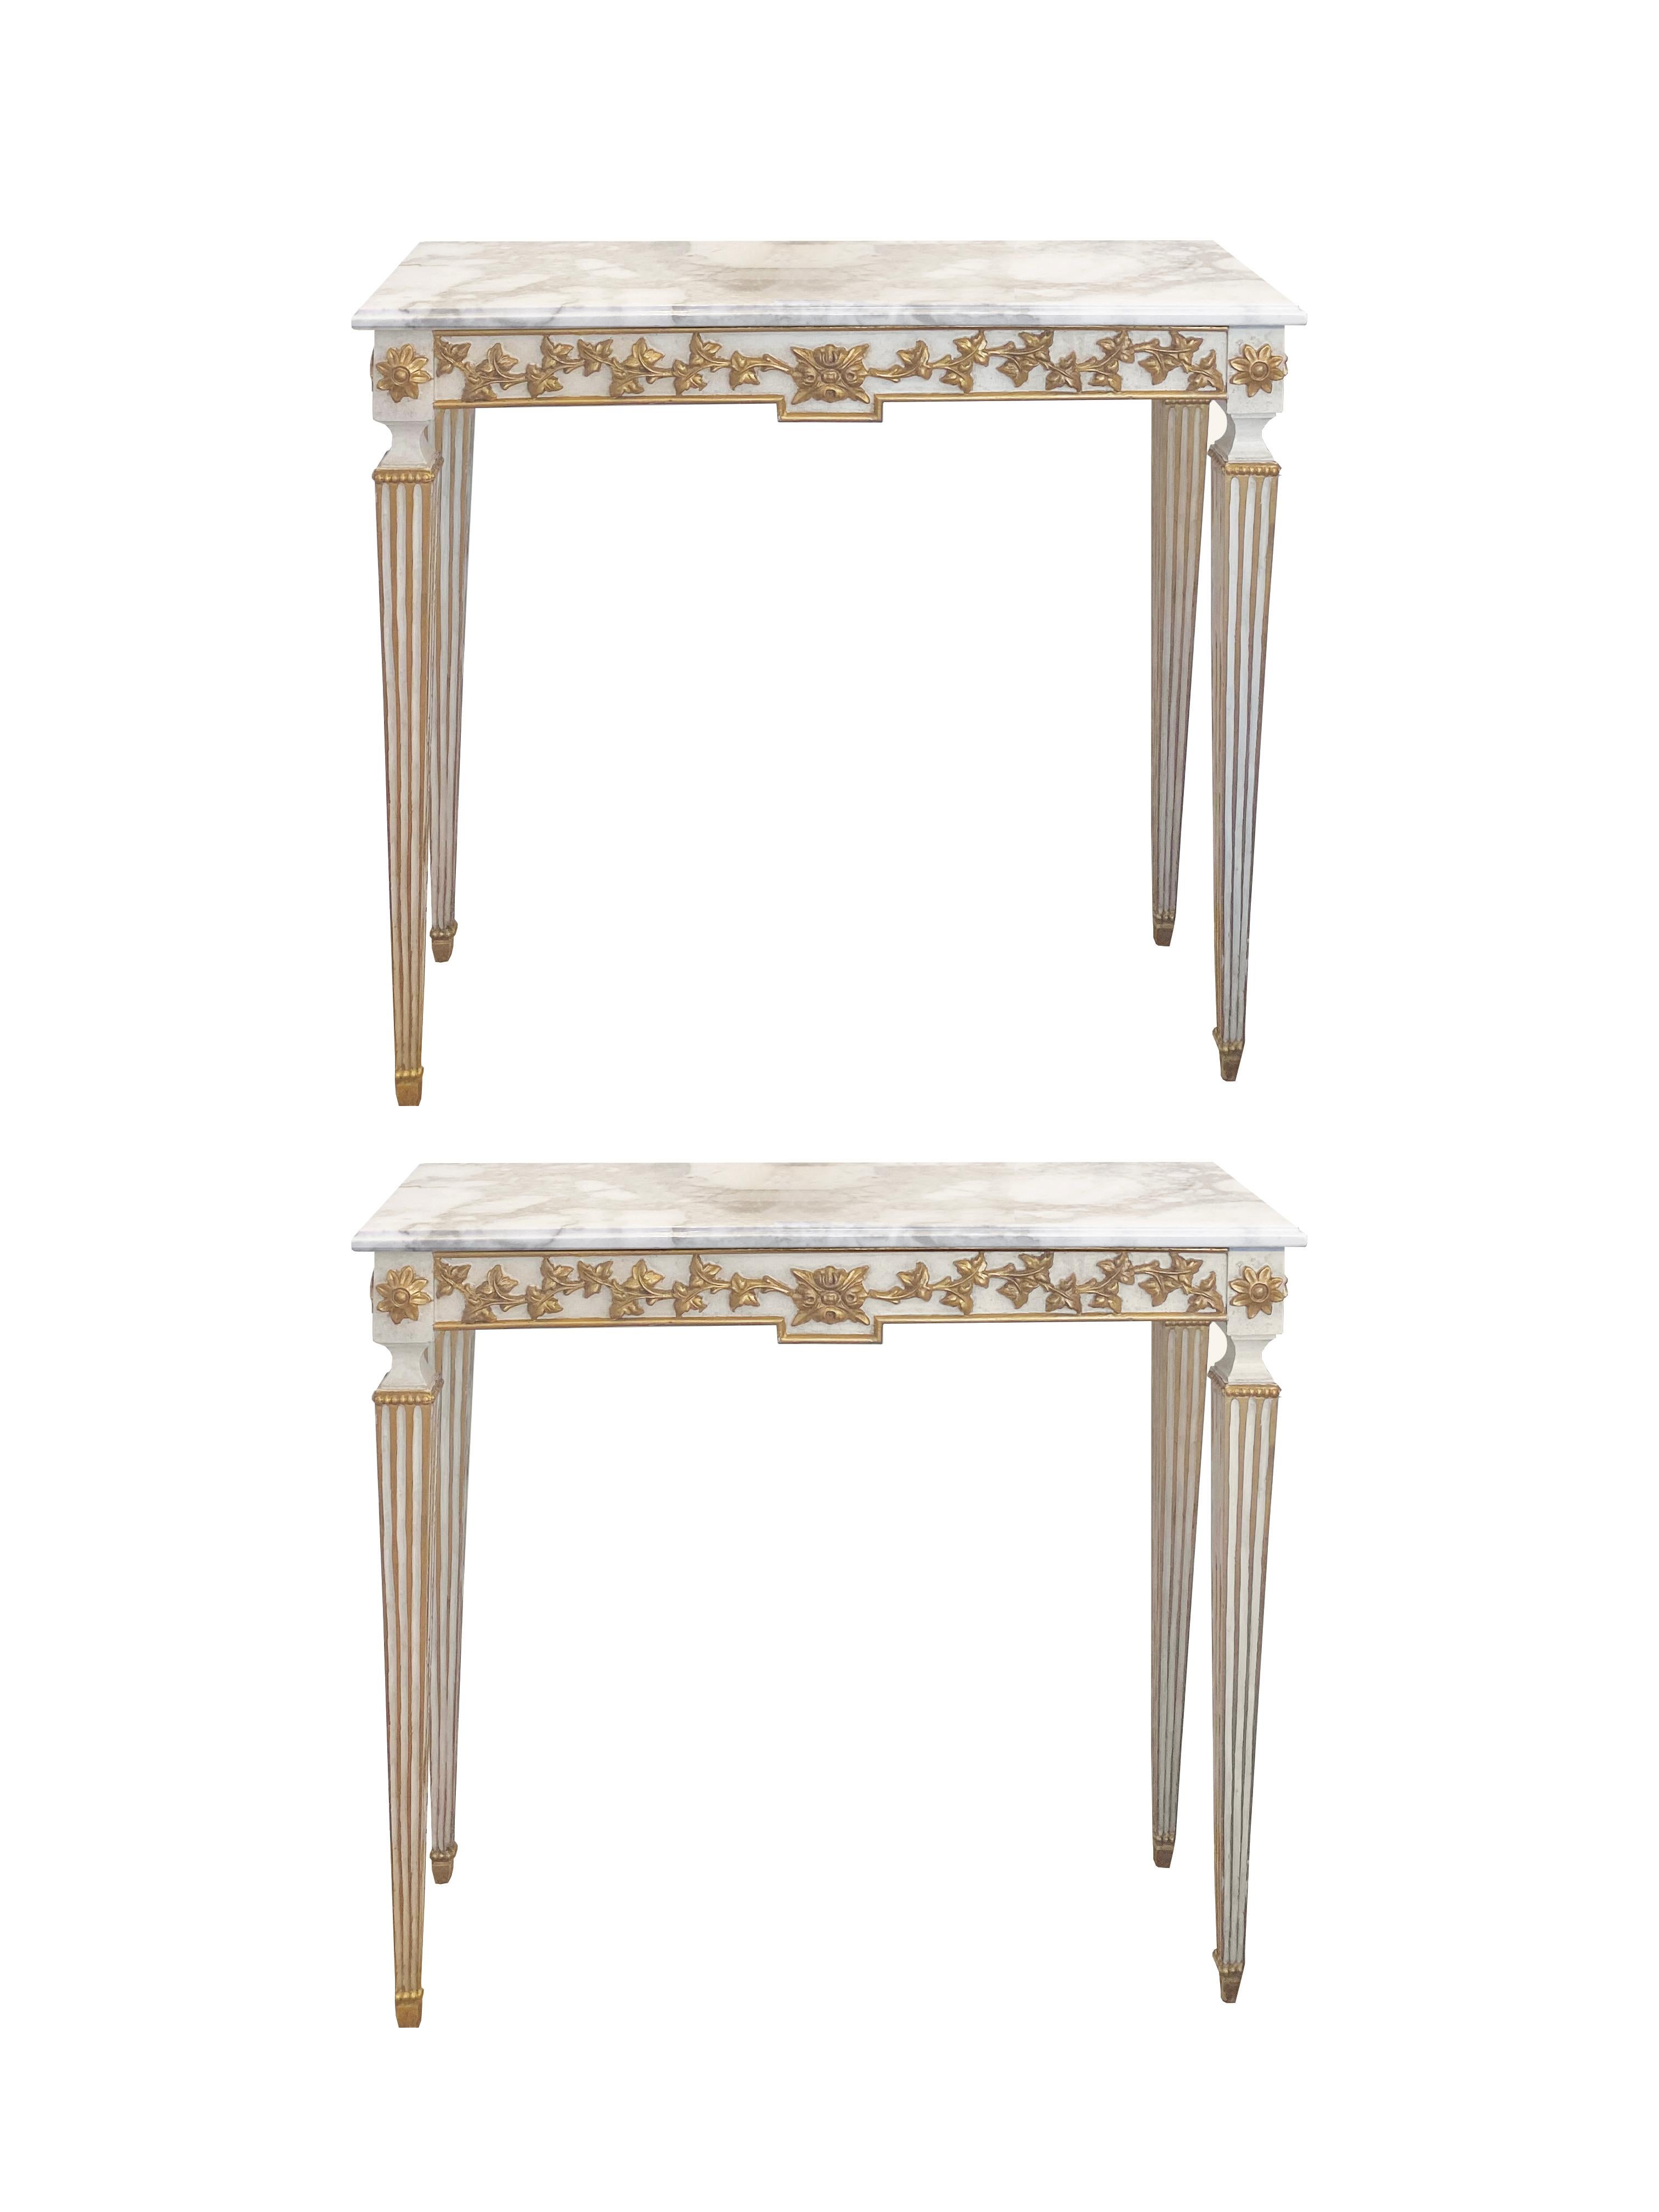 A pair of antique neoclassical Italian marble and gilt-painted marble console tables. Parcel gilt relief carved foliage is featured on tapering fluted legs, each with a white variegated marble top. We recommend using child-safe or earthquake